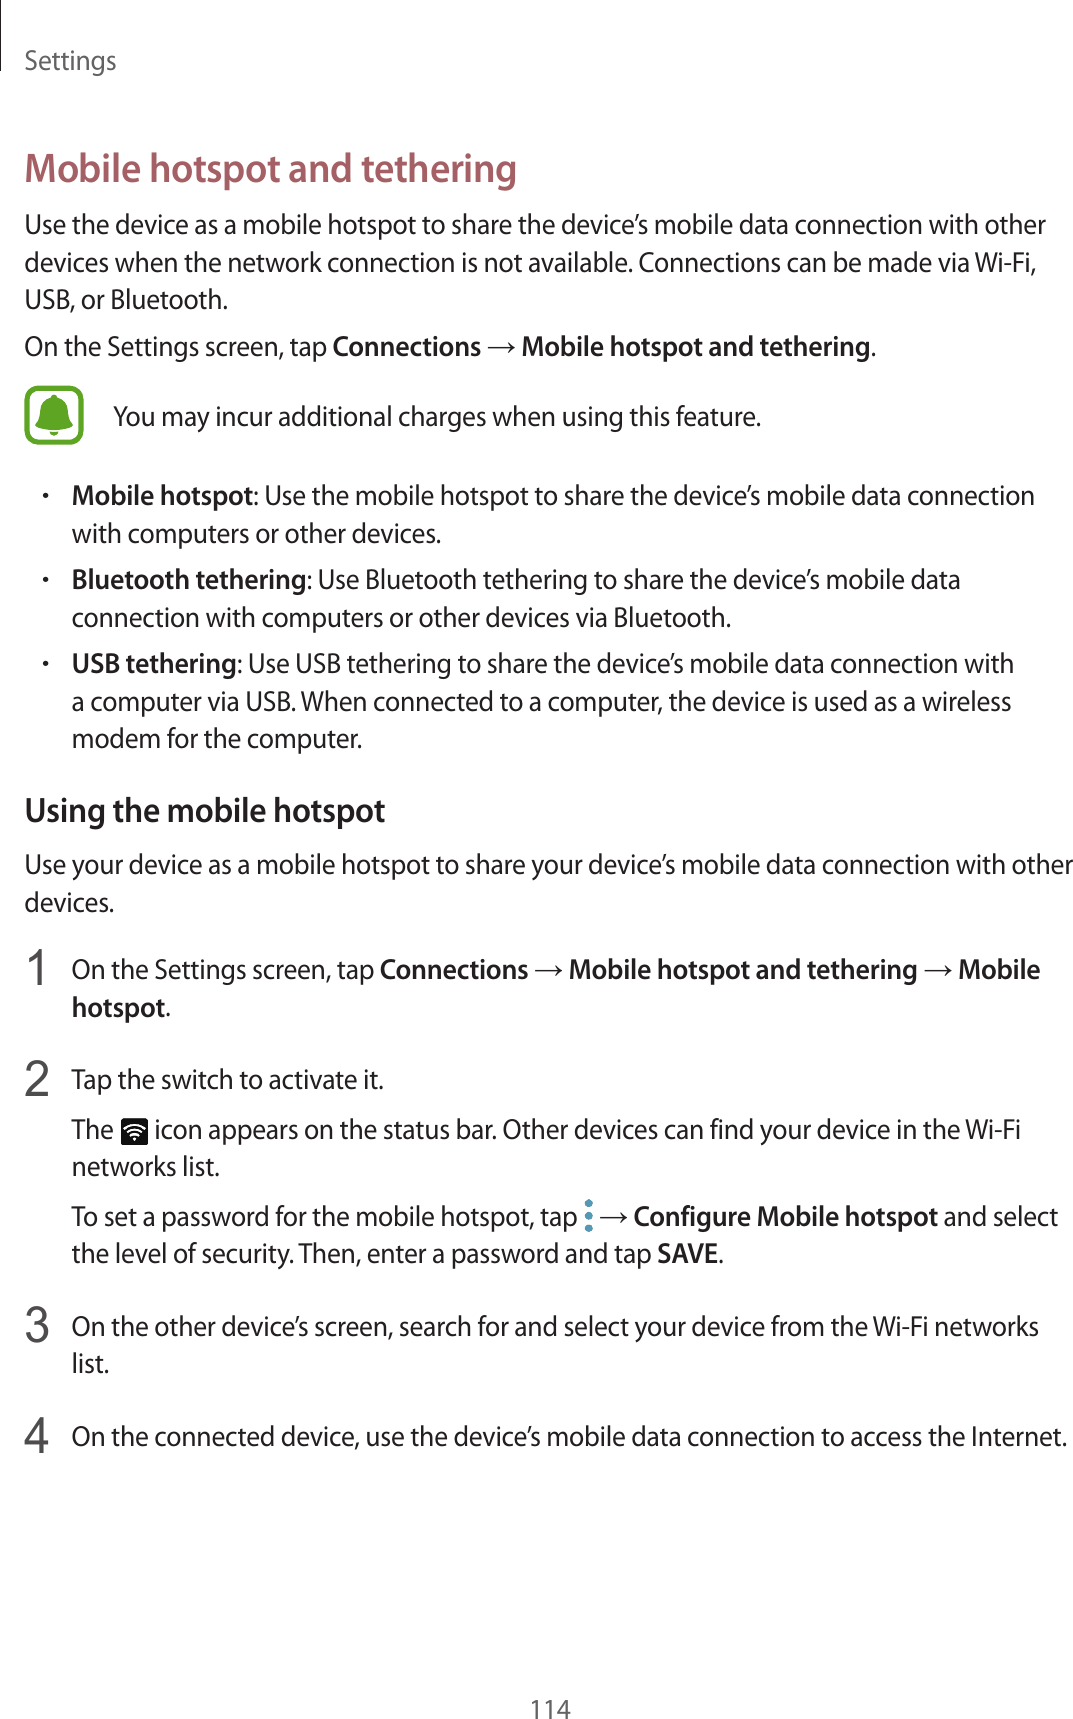 Settings114Mobile hotspot and tetheringUse the device as a mobile hotspot to share the device’s mobile data connection with other devices when the network connection is not available. Connections can be made via Wi-Fi, USB, or Bluetooth.On the Settings screen, tap Connections → Mobile hotspot and tethering.You may incur additional charges when using this feature.•Mobile hotspot: Use the mobile hotspot to share the device’s mobile data connection with computers or other devices.•Bluetooth tethering: Use Bluetooth tethering to share the device’s mobile data connection with computers or other devices via Bluetooth.•USB tethering: Use USB tethering to share the device’s mobile data connection with a computer via USB. When connected to a computer, the device is used as a wireless modem for the computer.Using the mobile hotspotUse your device as a mobile hotspot to share your device’s mobile data connection with other devices.1  On the Settings screen, tap Connections → Mobile hotspot and tethering → Mobile hotspot.2  Tap the switch to activate it.The   icon appears on the status bar. Other devices can find your device in the Wi-Fi networks list.To set a password for the mobile hotspot, tap   → Configure Mobile hotspot and select the level of security. Then, enter a password and tap SAVE.3  On the other device’s screen, search for and select your device from the Wi-Fi networks list.4  On the connected device, use the device’s mobile data connection to access the Internet.